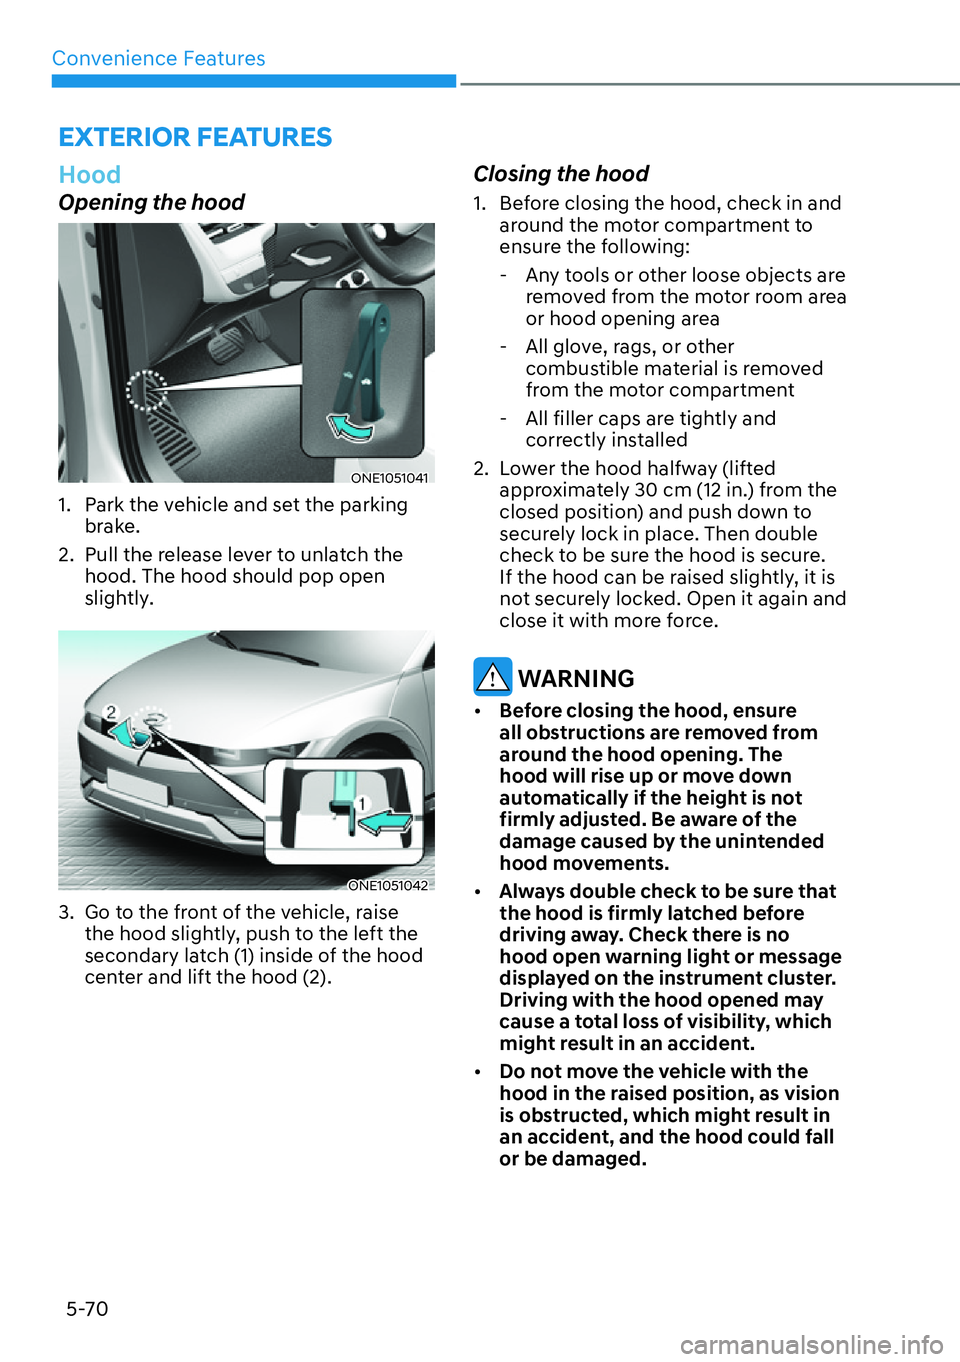 HYUNDAI IONIQ 5 2022 Service Manual Convenience Features
5-70
EXTERIOR FEATURES
Hood
Opening the hood
ONE1051041 
1.  Park the vehicle and set the parking 
brake.
2.  Pull the release lever to unlatch the 
hood. The hood should pop open